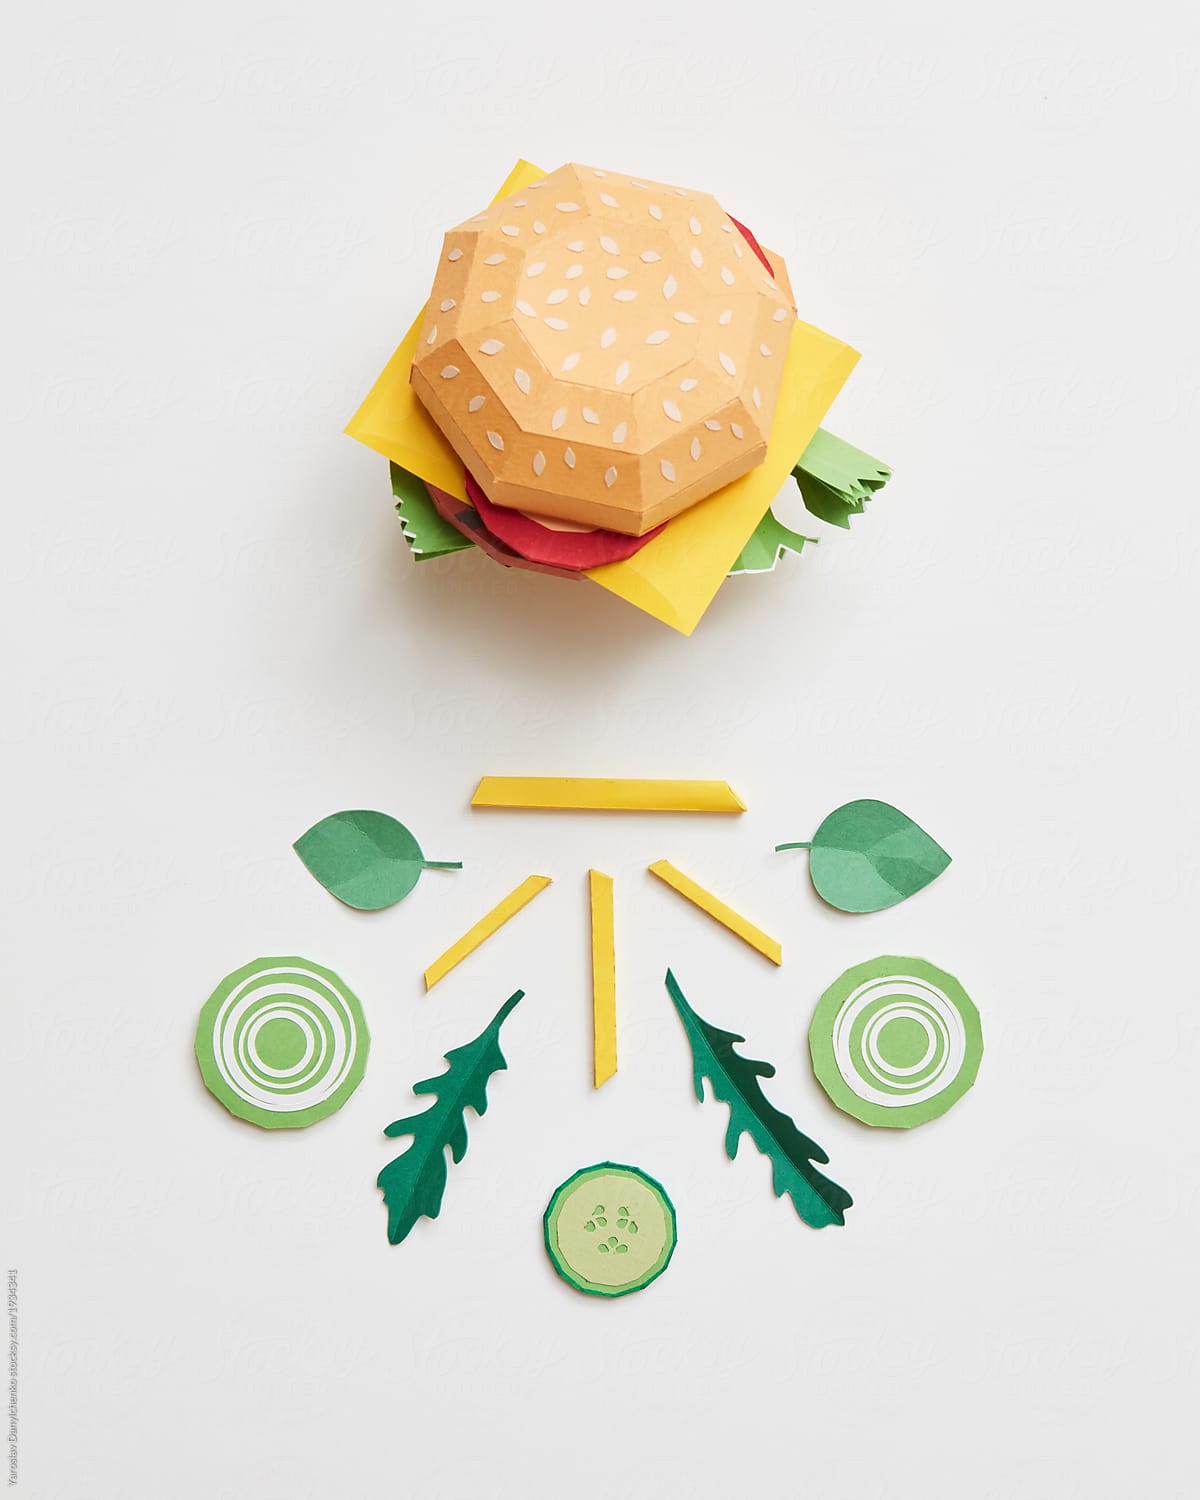 Paper craft ingredients for cooking green salad, French fries and burger on white background